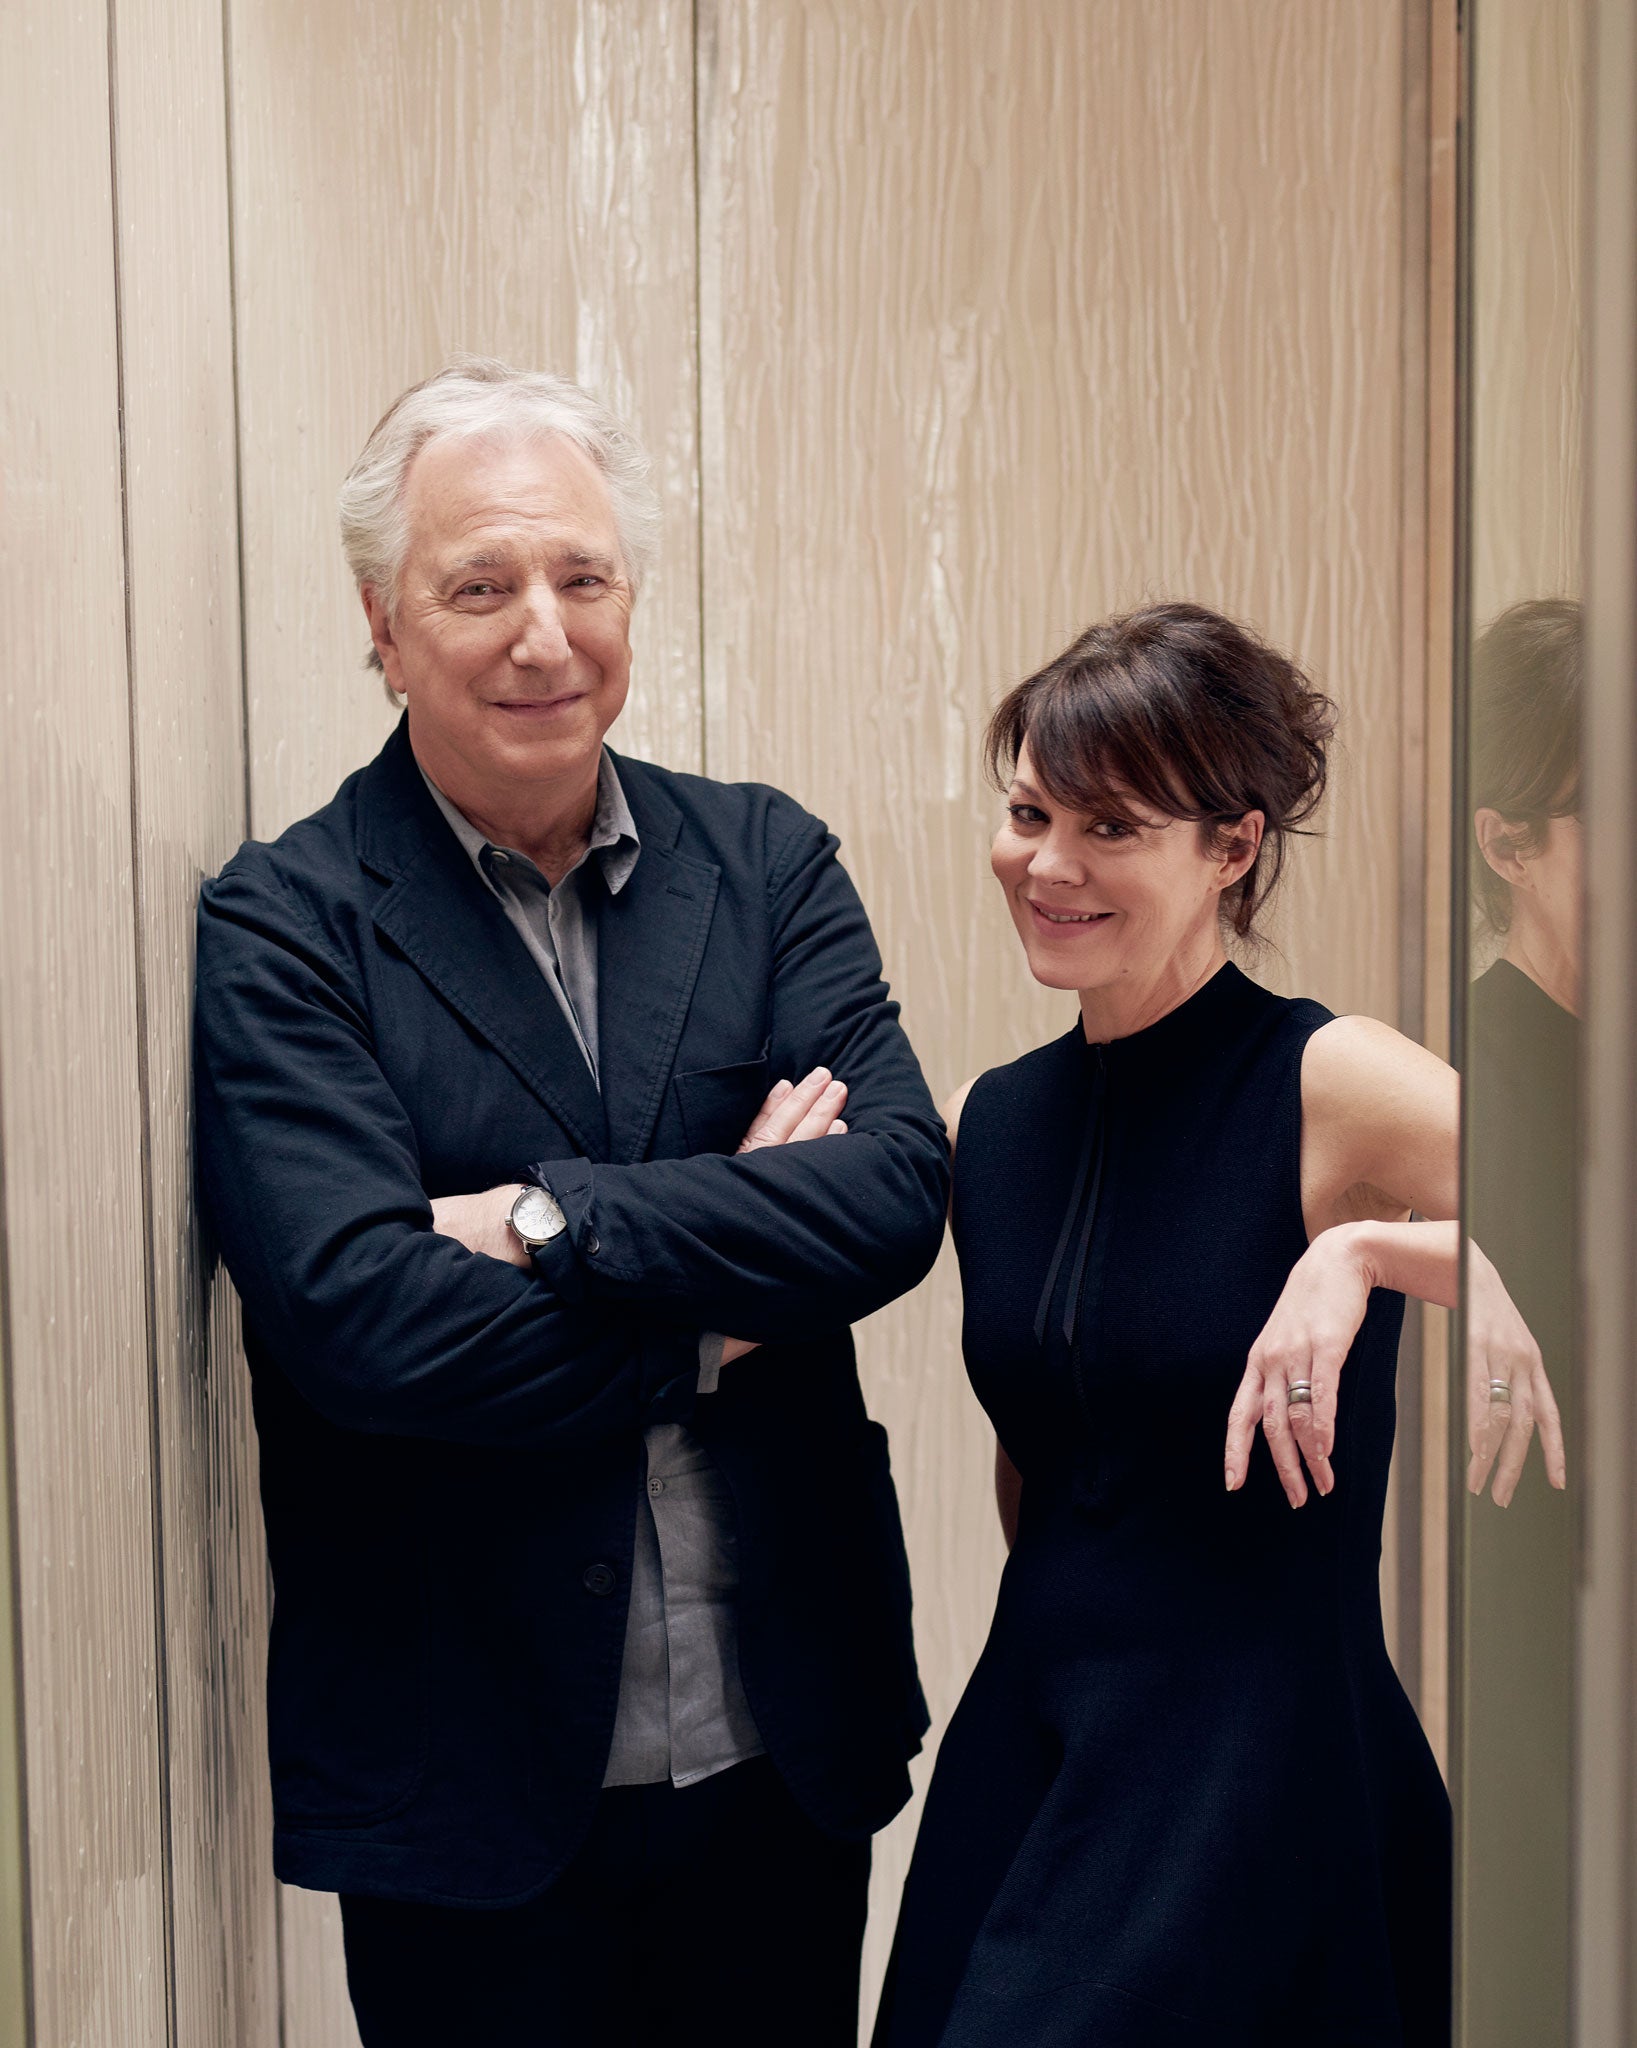 Alan Rickman & Helen Mccrory: 'With Us It'S Mostly About Laughter And The  Odd Martini' | The Independent | The Independent